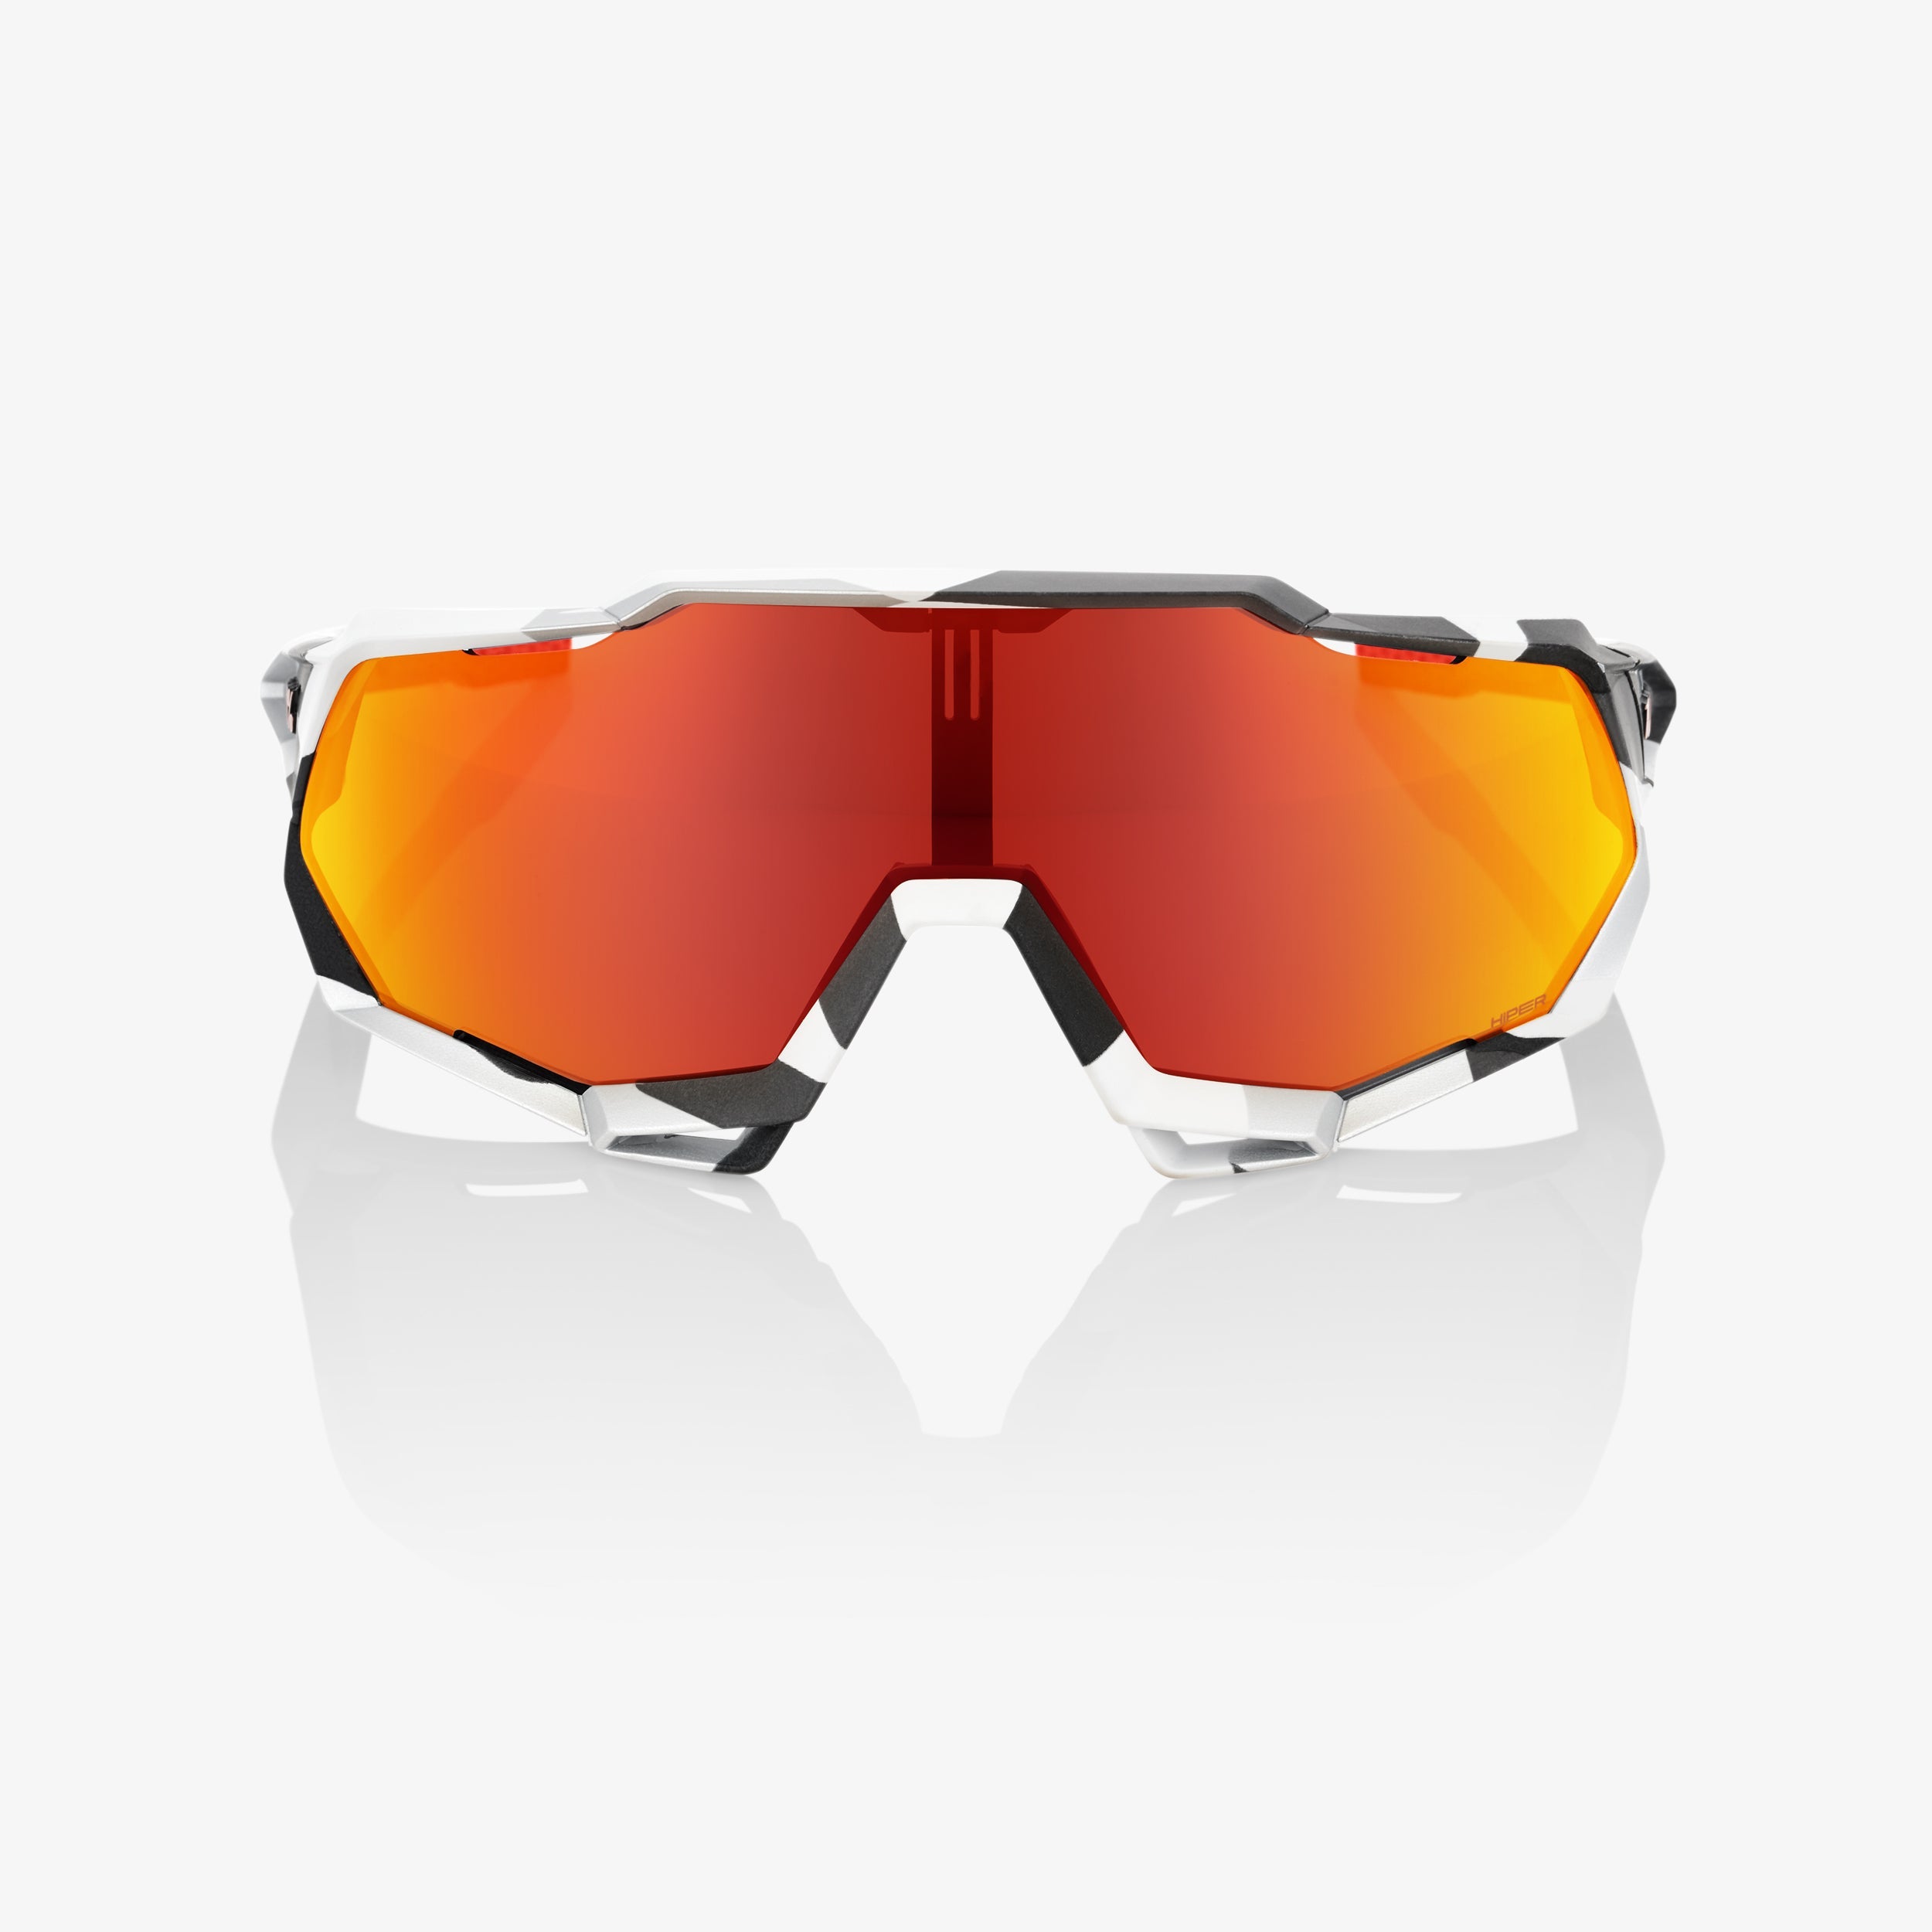 SPEEDTRAP® - Soft Tact Grey Camo - HiPER® Red Multilayer Mirror Lens - Secondary